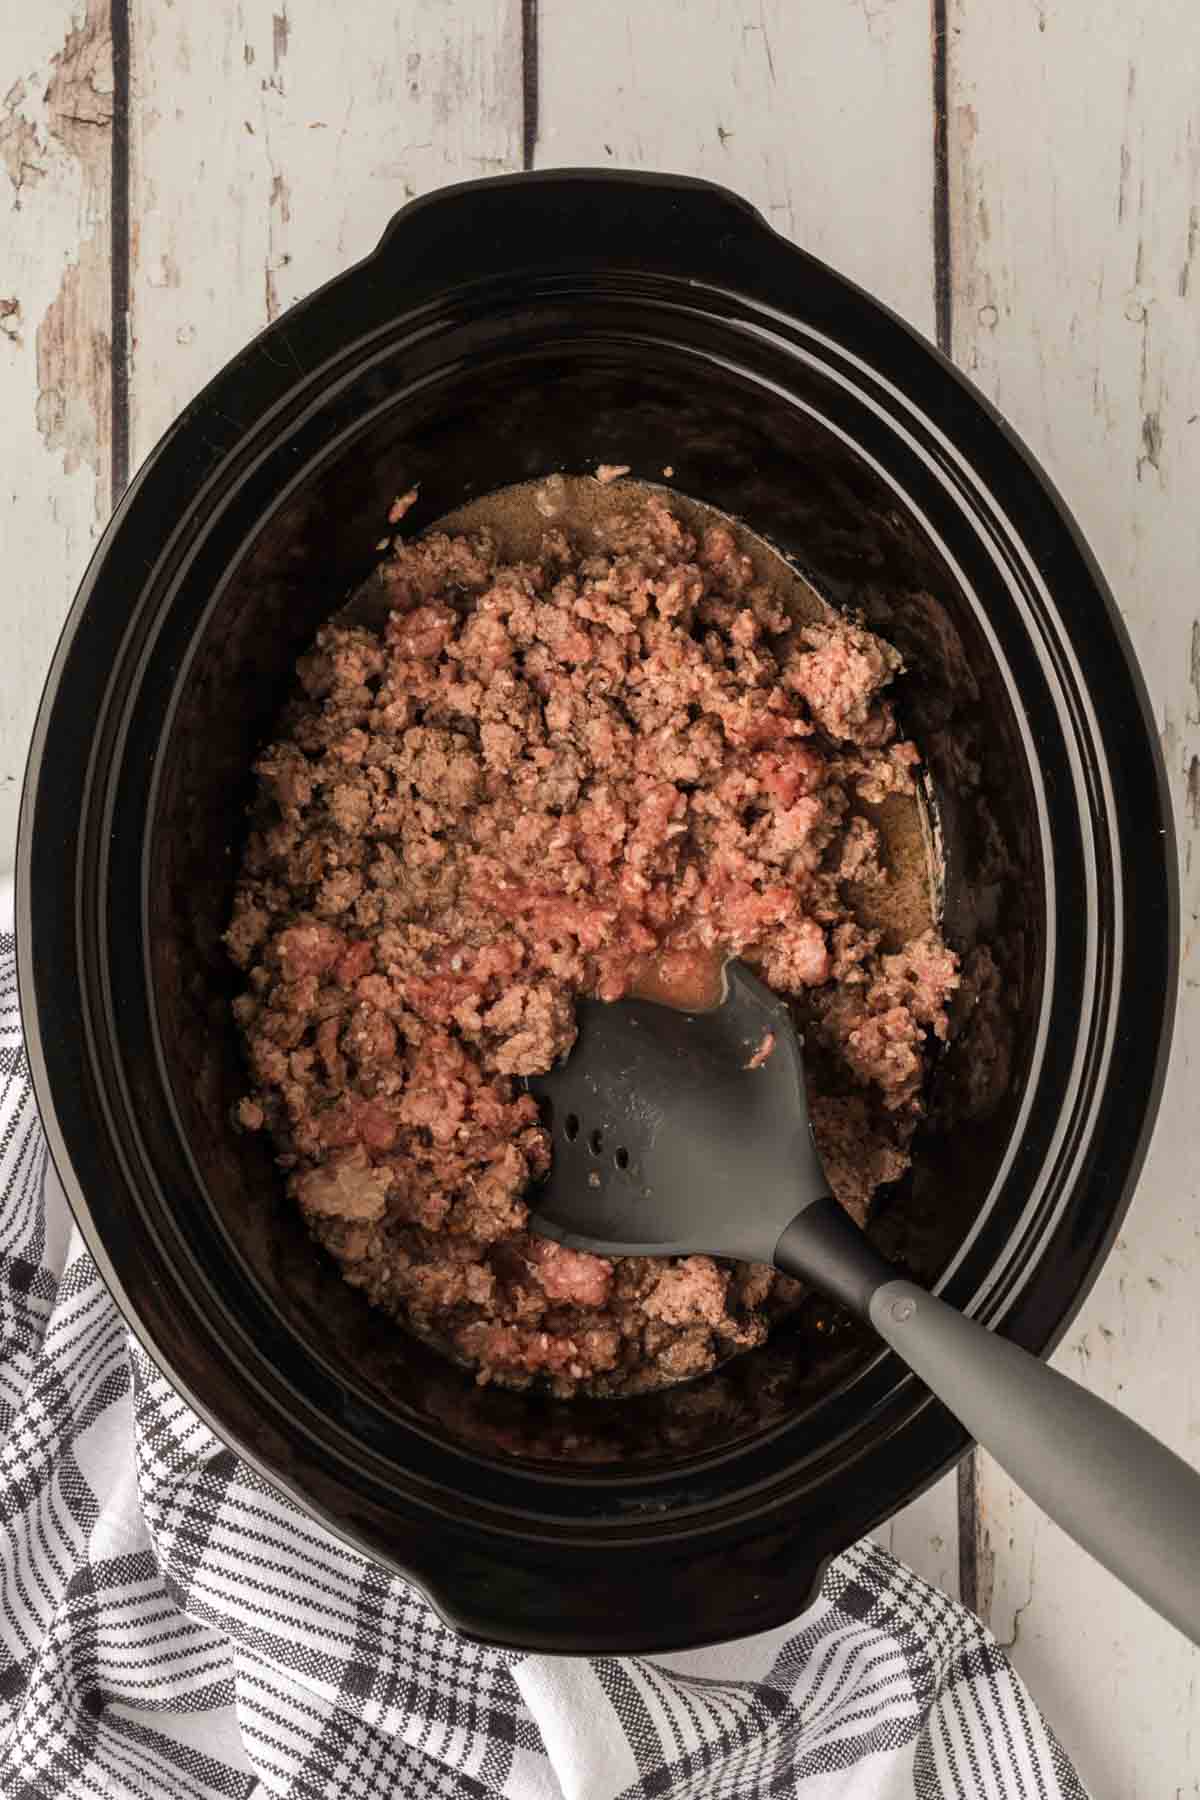 Chopping up ground beef in the slow cooker